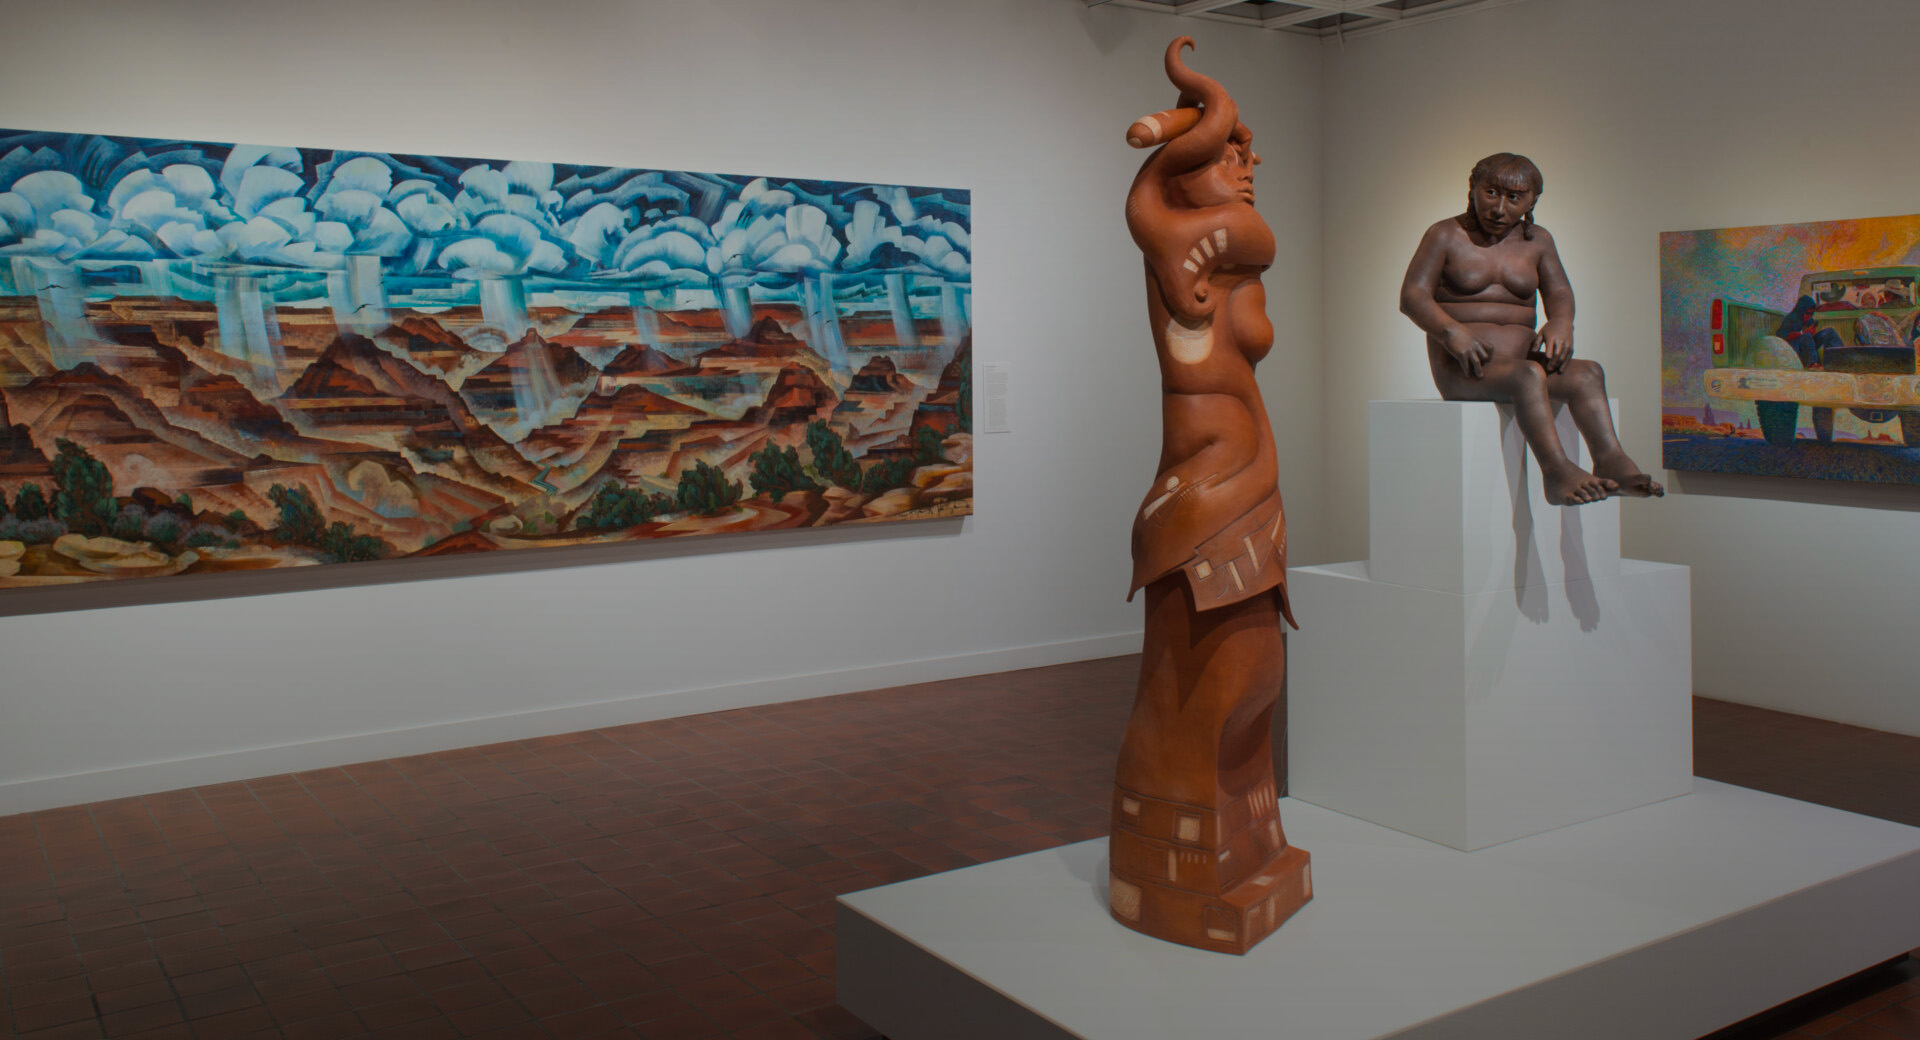 A sculpture sits on a pedestal in an art gallery with paintings on the walls.